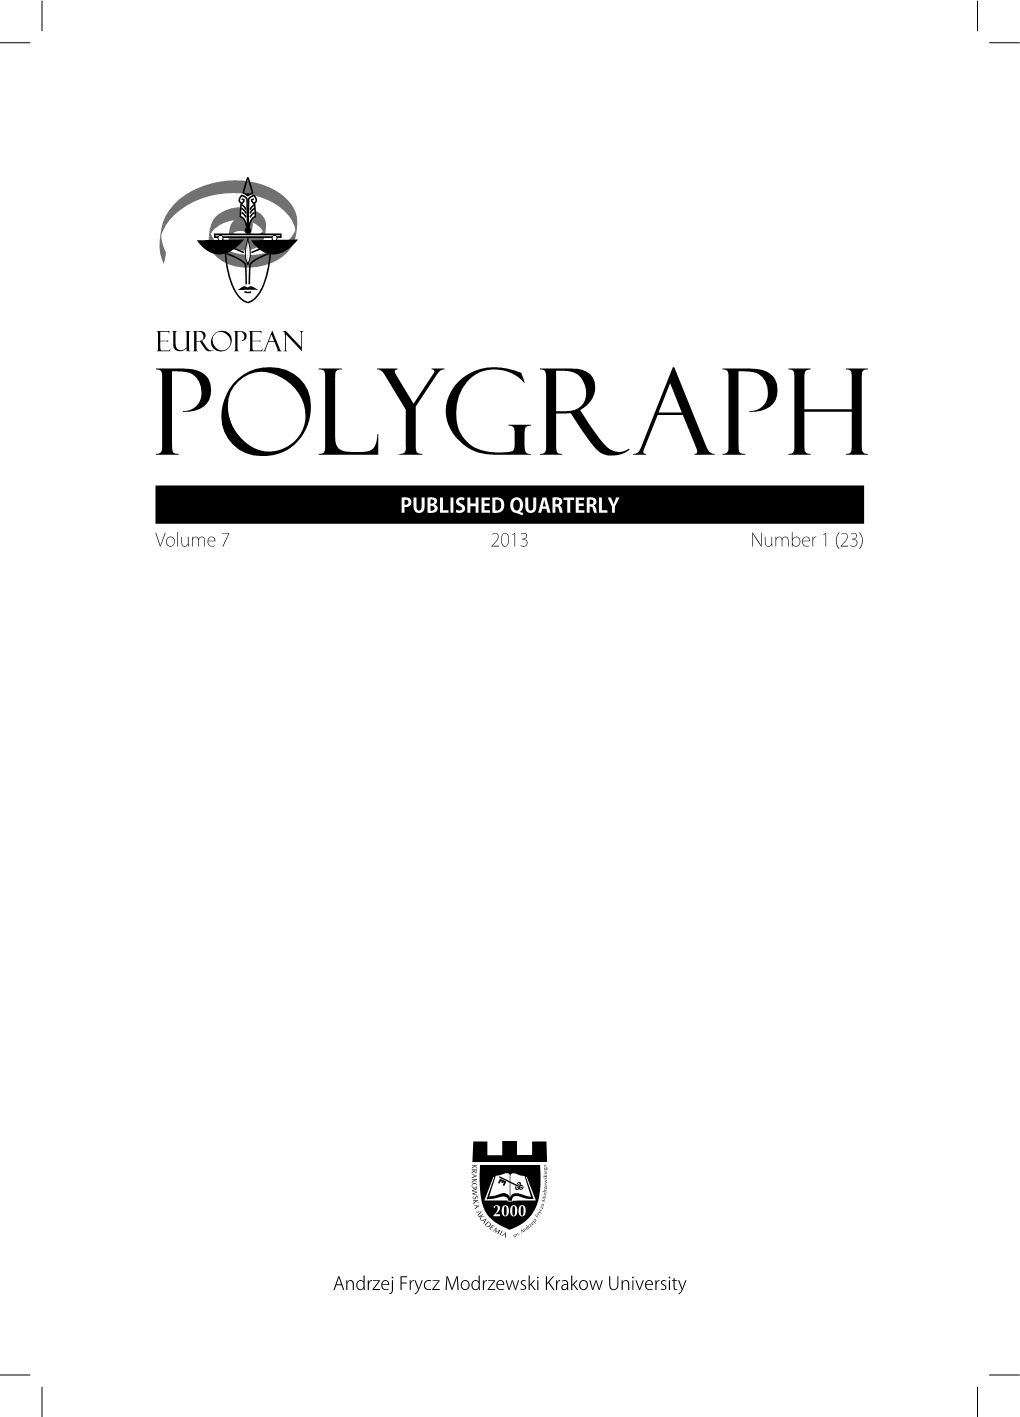 Comparative Review of Polygraph and Other Diagnostic Tools and Methods Cover Image